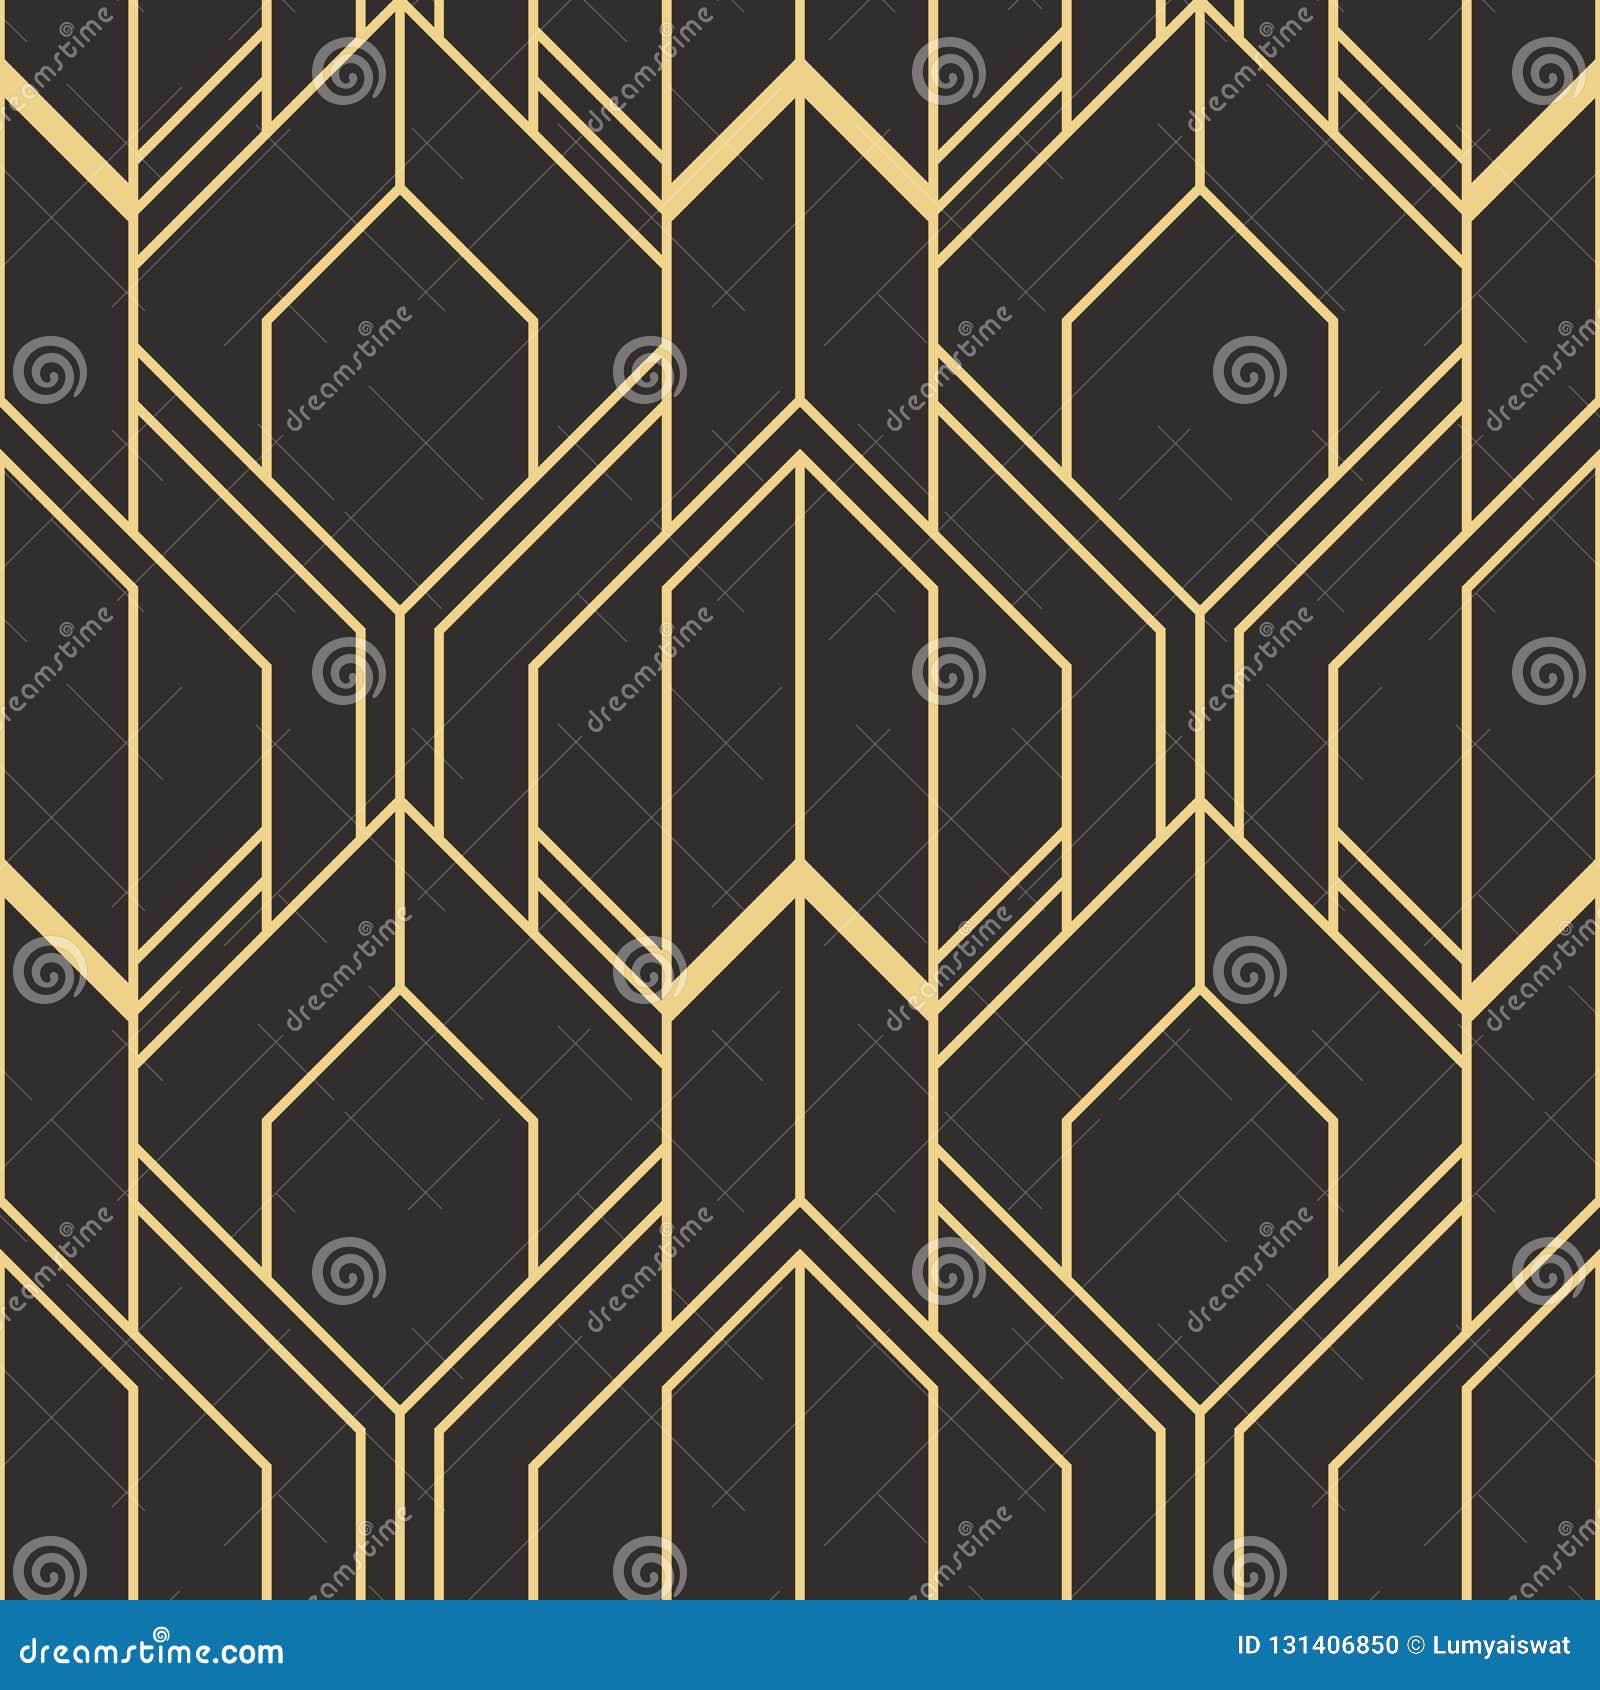 golden lined . abstract art deco seamless luxury background